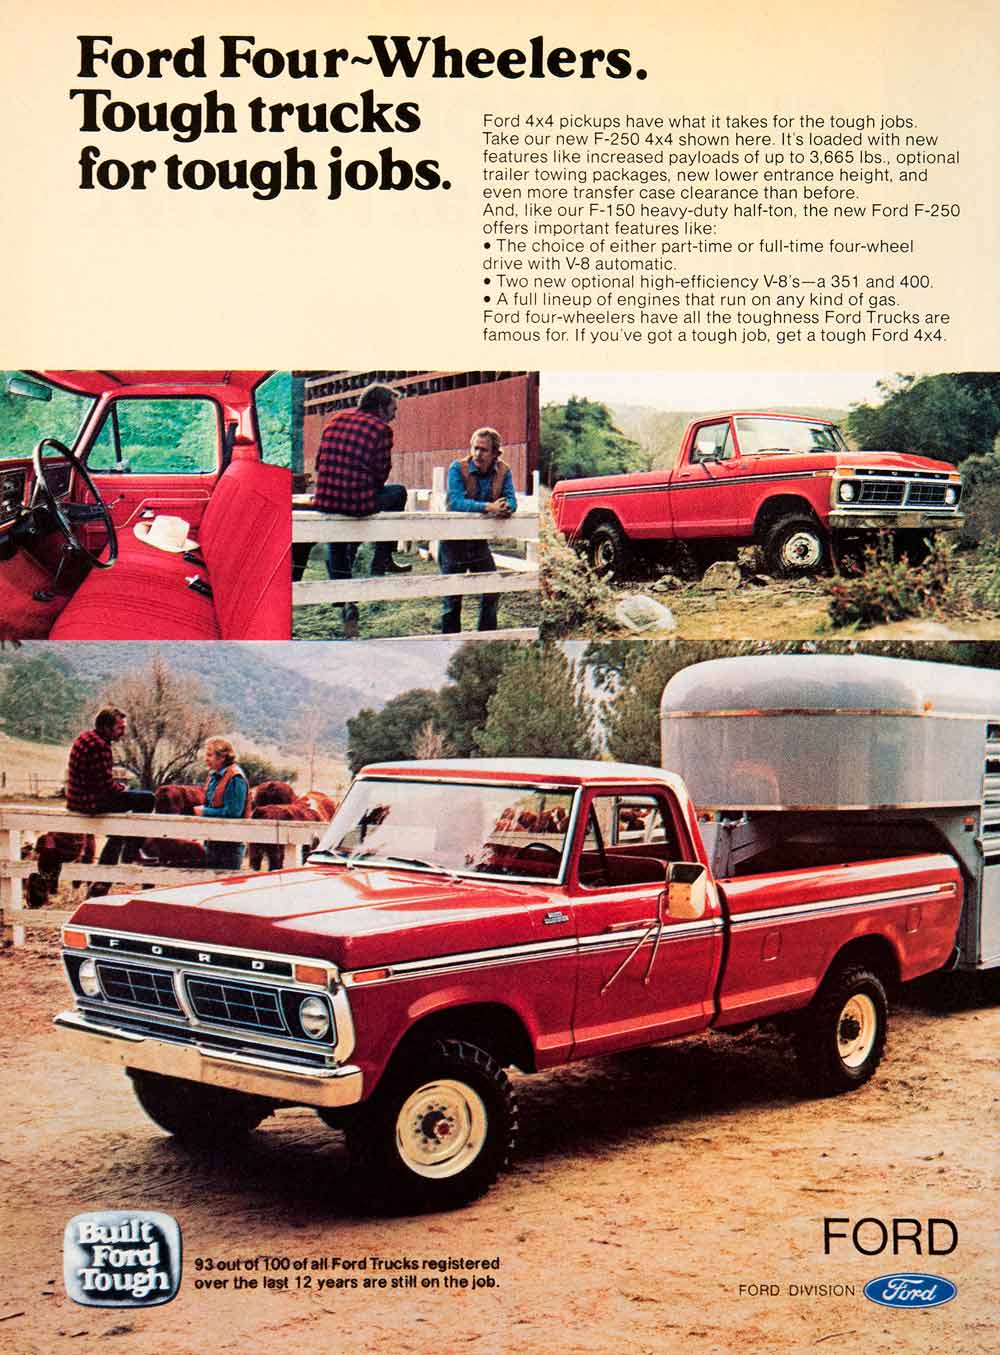 1977 Ad Ford Vehicle Pickup Truck Automobile V8 Cattle Farming Agriculture SF4